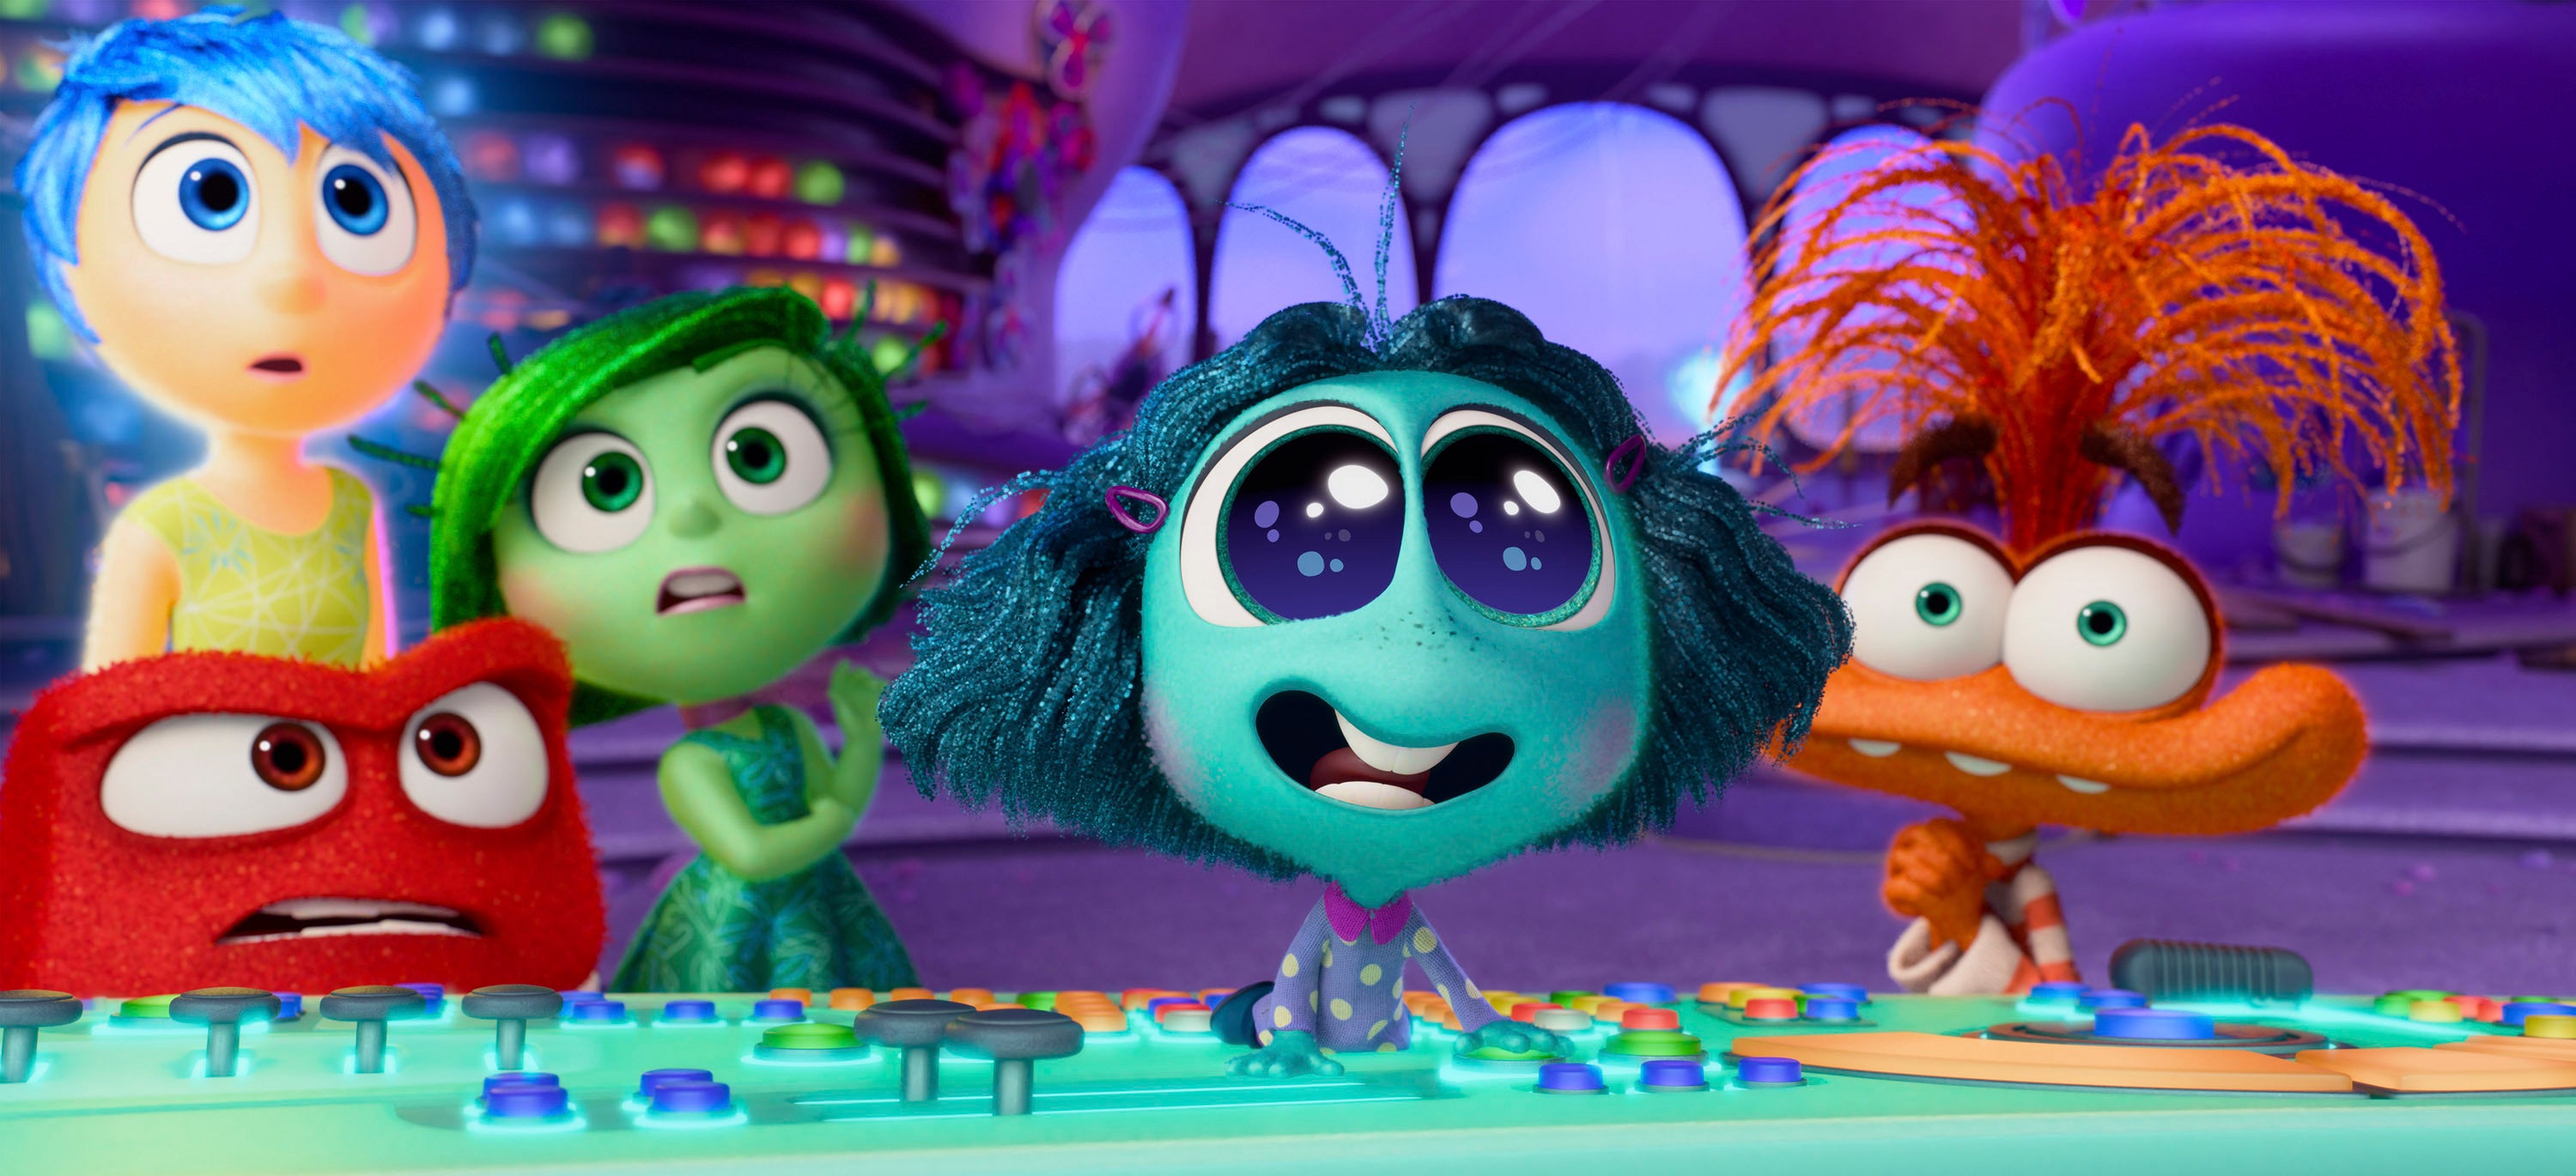 Inside Out 2 had the strongest opening weekend this year